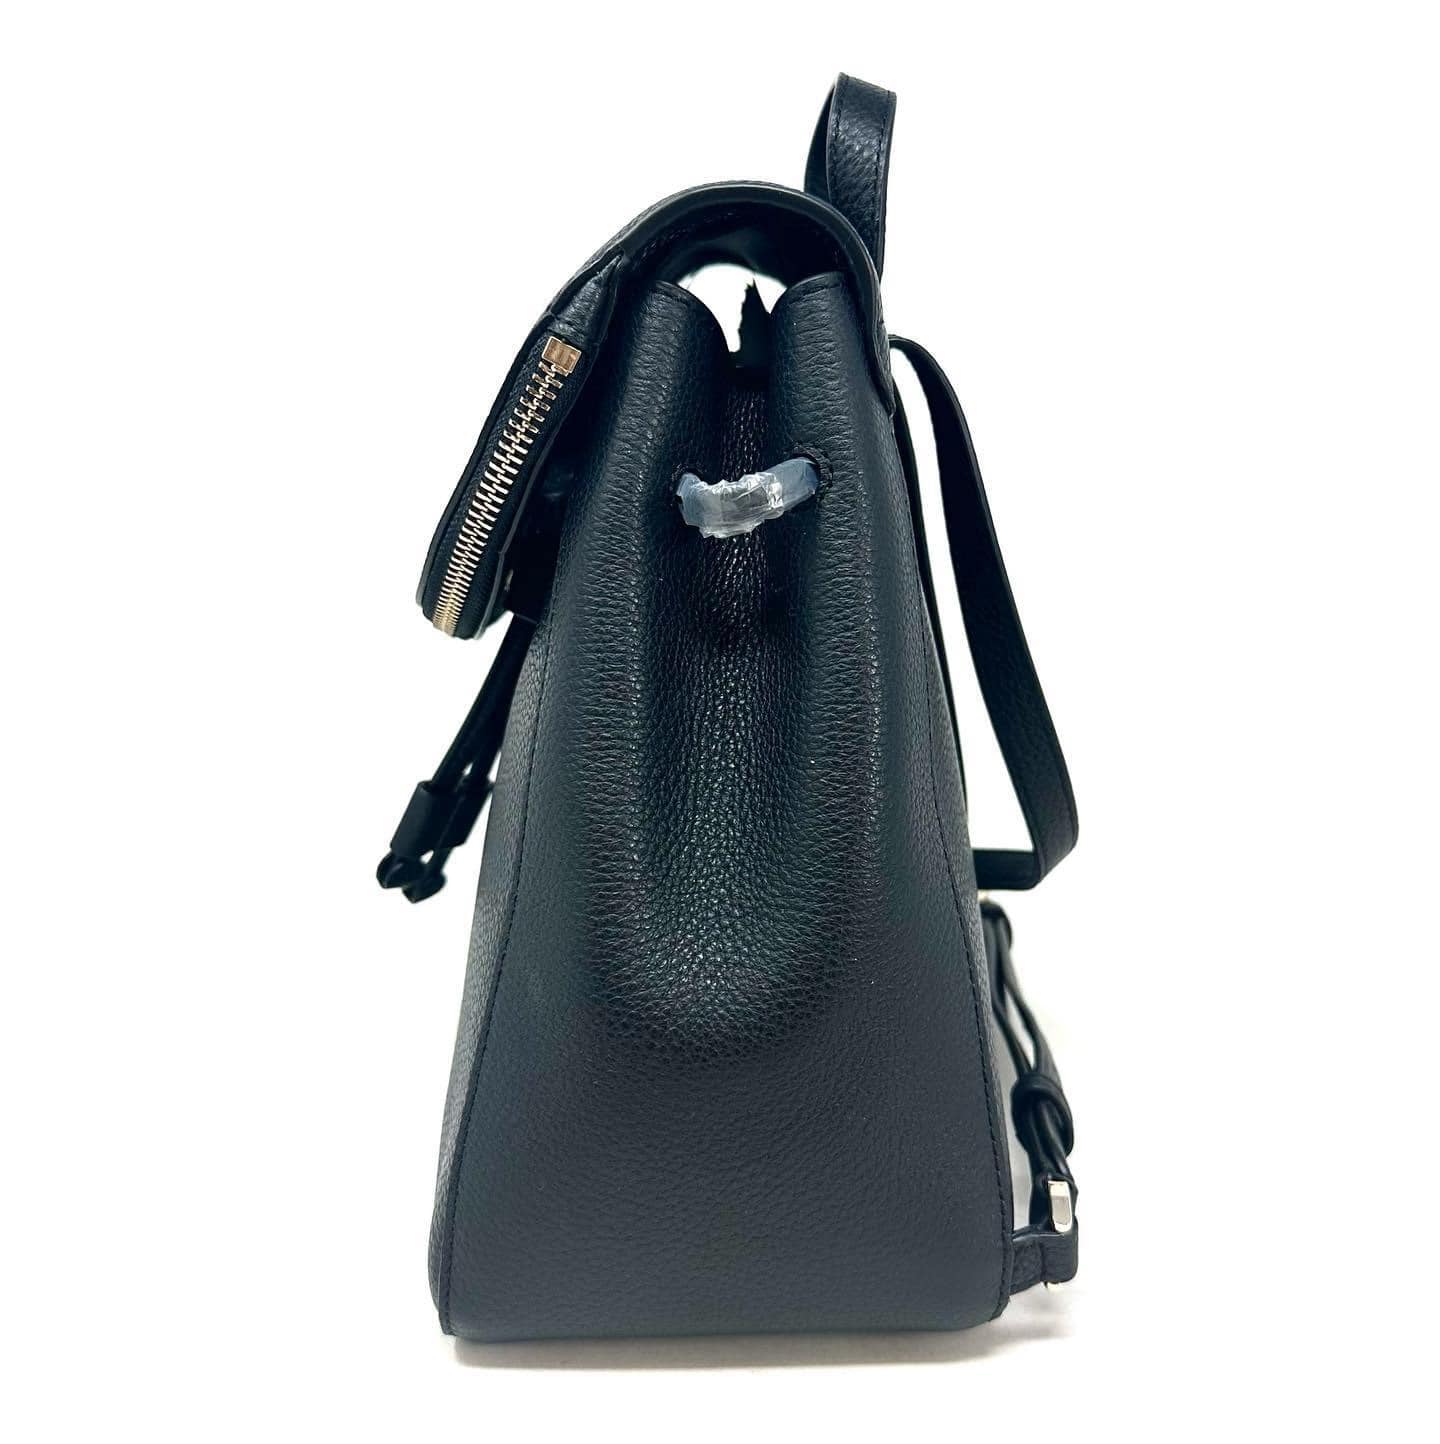 Tory Burch Black Leila Flap Backpack item #40348 – ALL YOUR BLISS